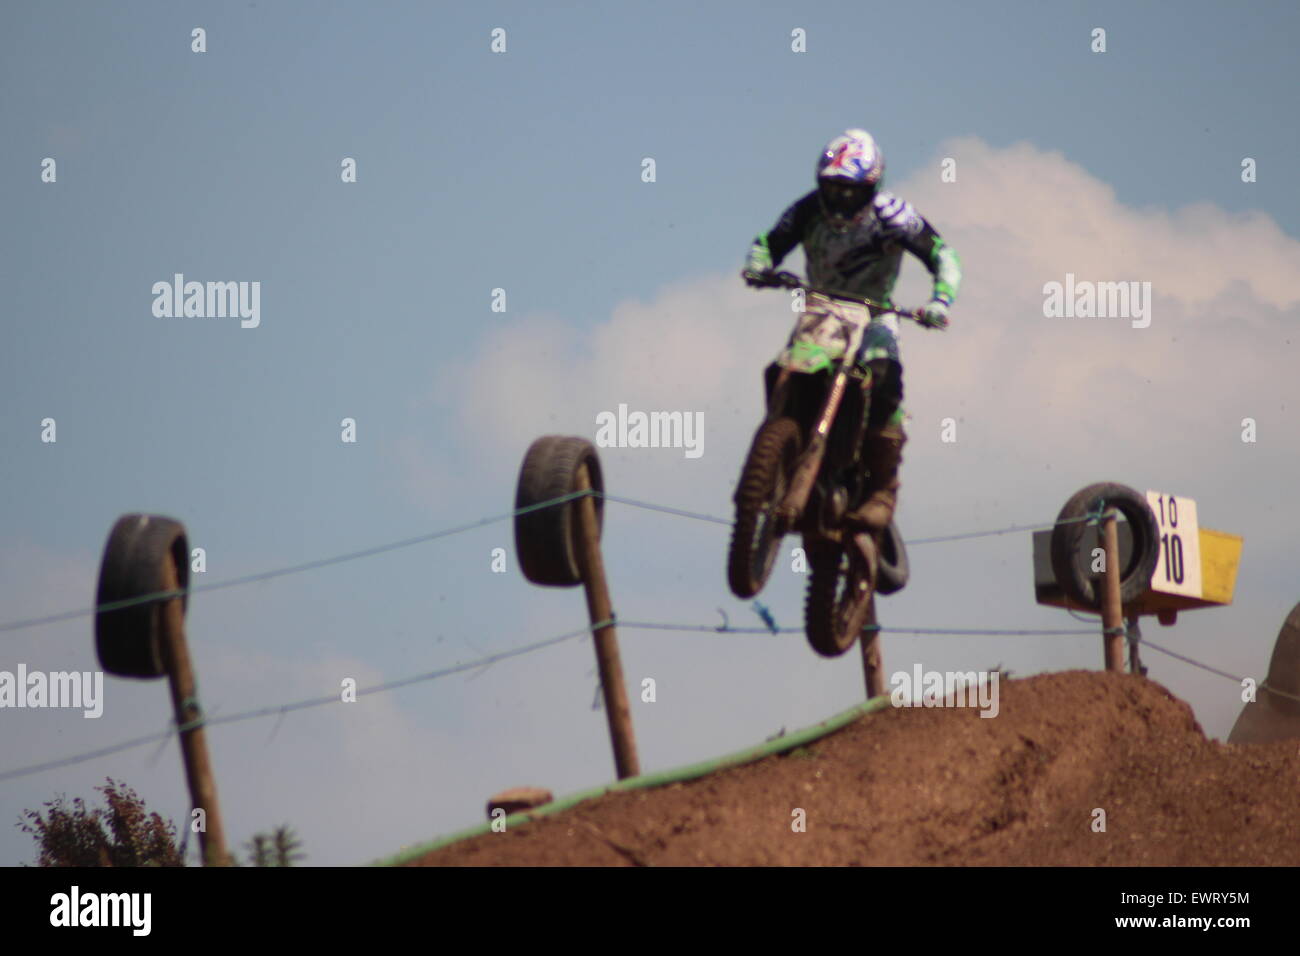 Action motorcycle, motocross, Speed and stunts leaping through the air Stock Photo